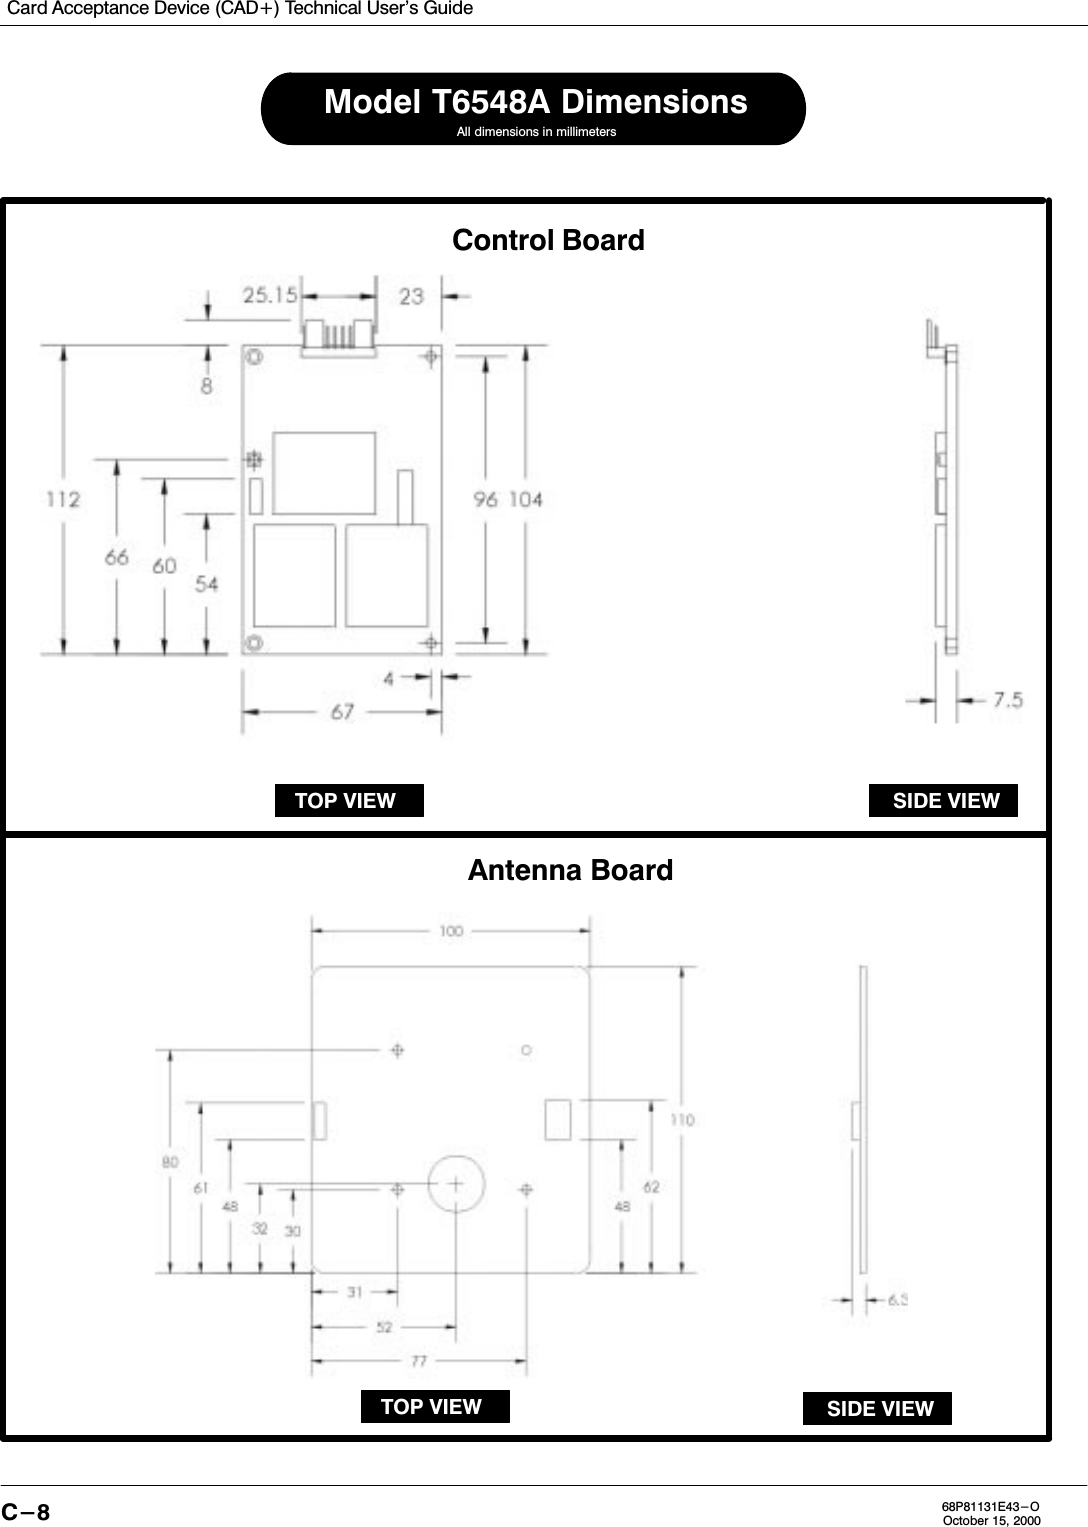 Card Acceptance Device (CAD+) Technical User&apos;s GuideC-8 68P81131E43-OOctober 15, 2000Control BoardTOP VIEW SIDE VIEWAntenna BoardAll dimensions in millimetersModel T6548A DimensionsSIDE VIEWTOP VIEW